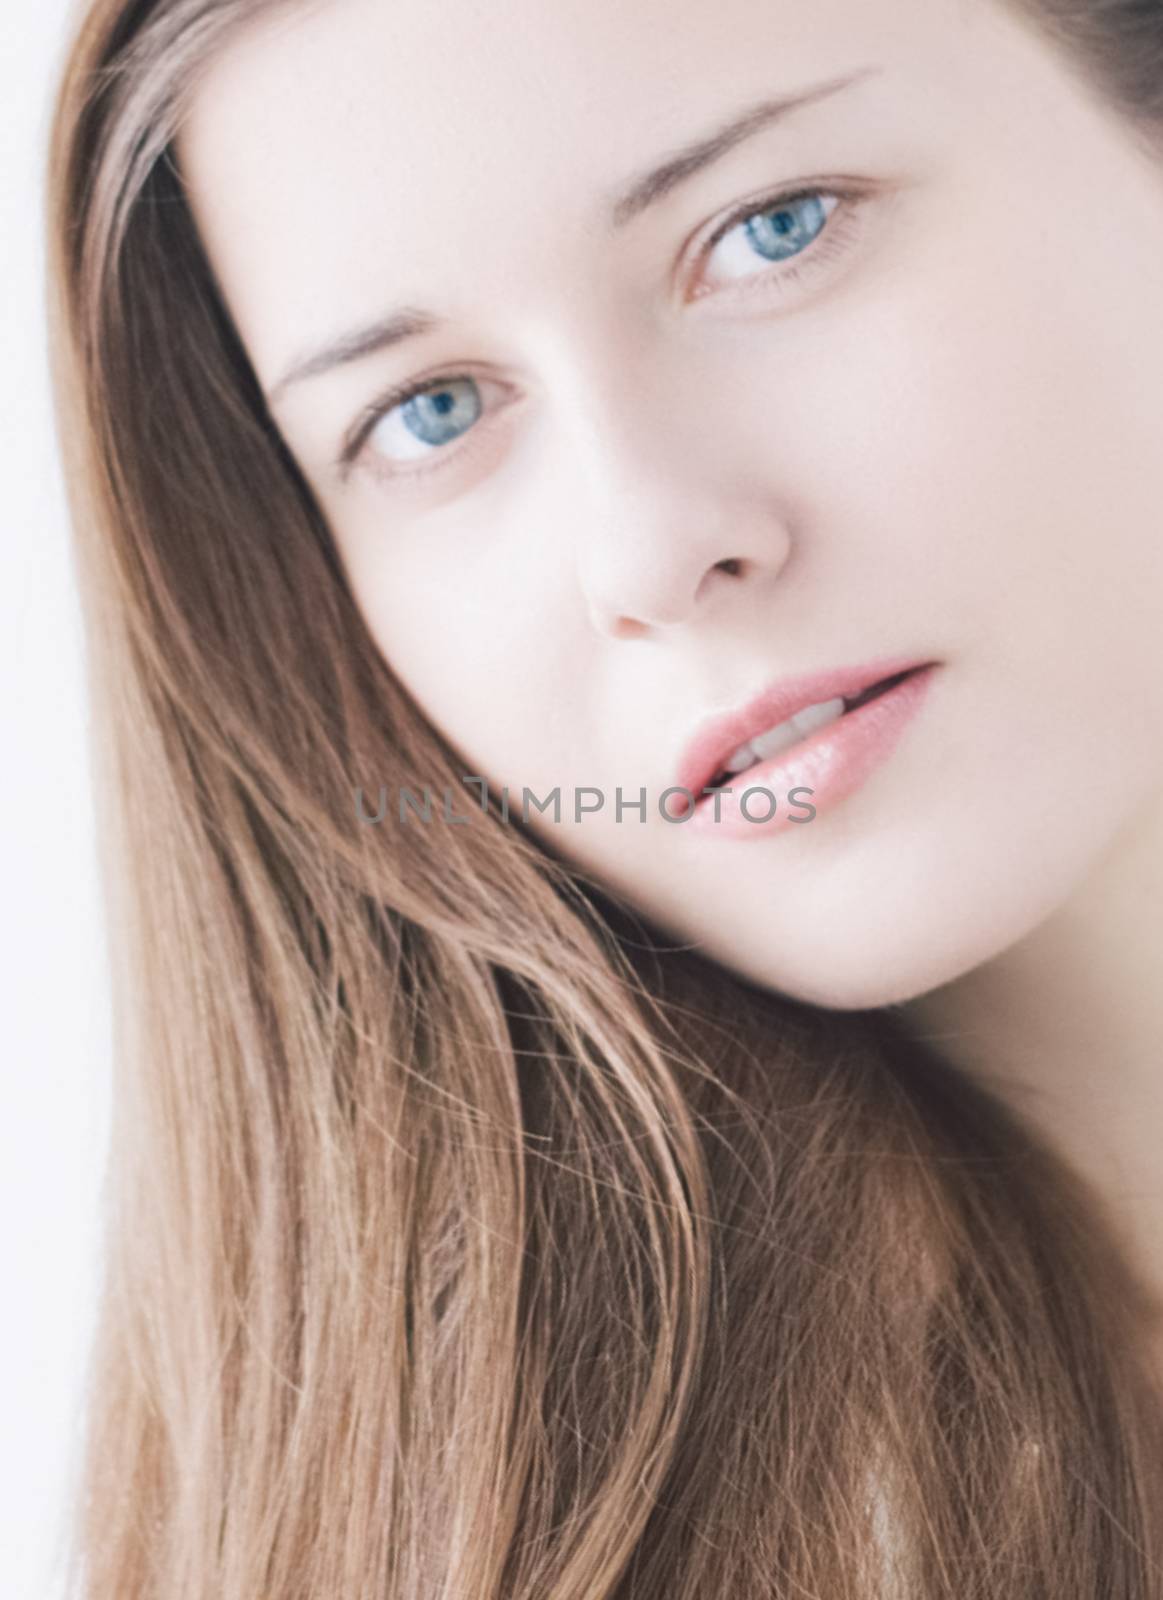 Feminine woman as closeup beauty face portrait, young girl with natural makeup look and long hairstyle for female hair care, cosmetic or skincare brands